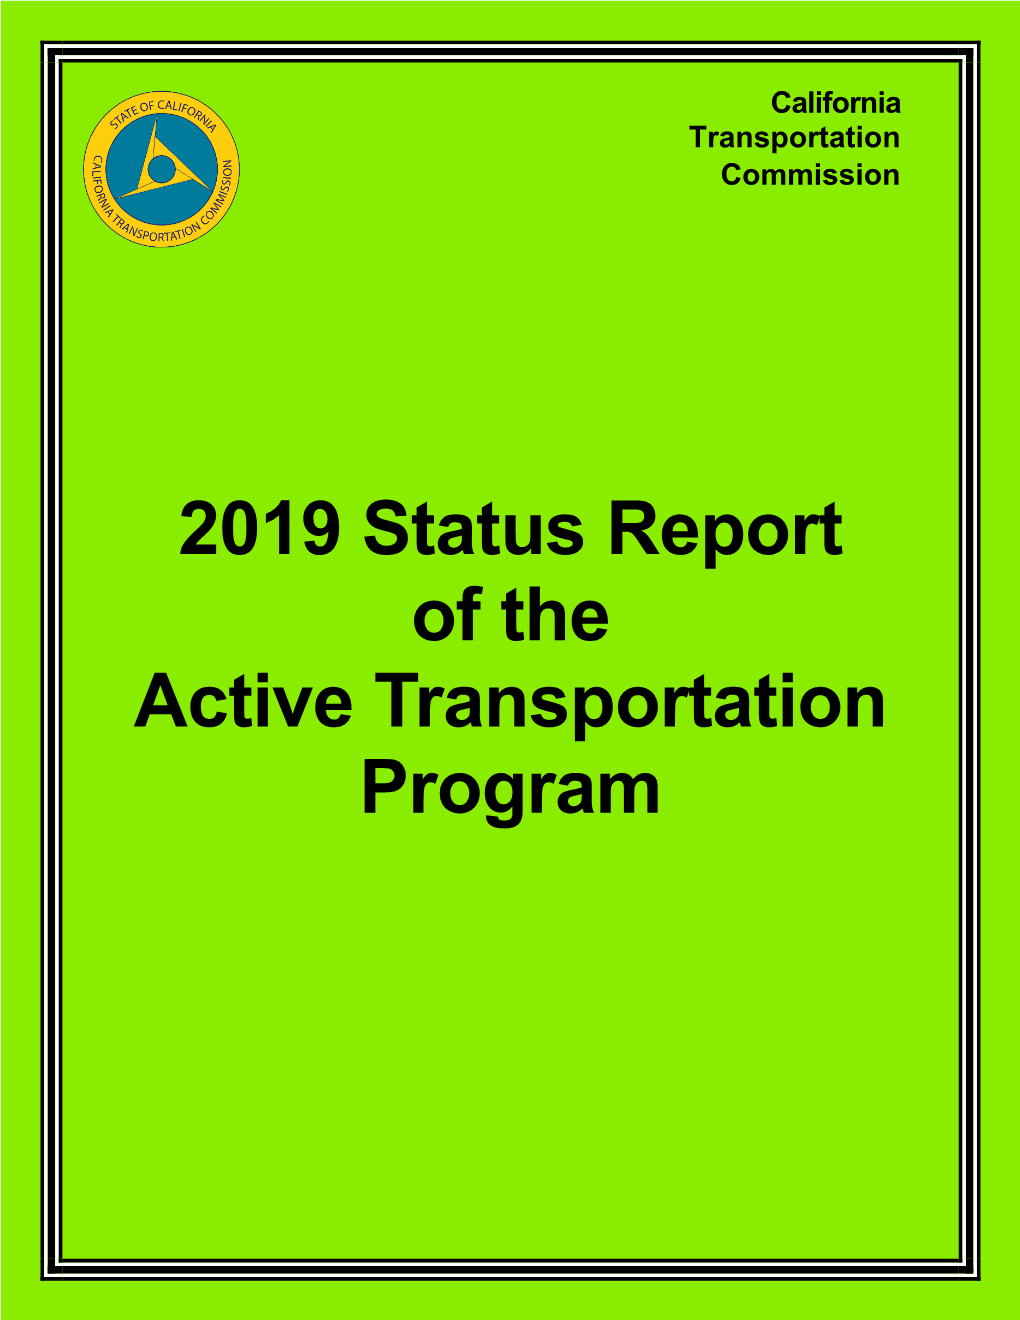 2019 Status Report of the Active Transportation Program 2019 Status Report of the Active Transportation Program